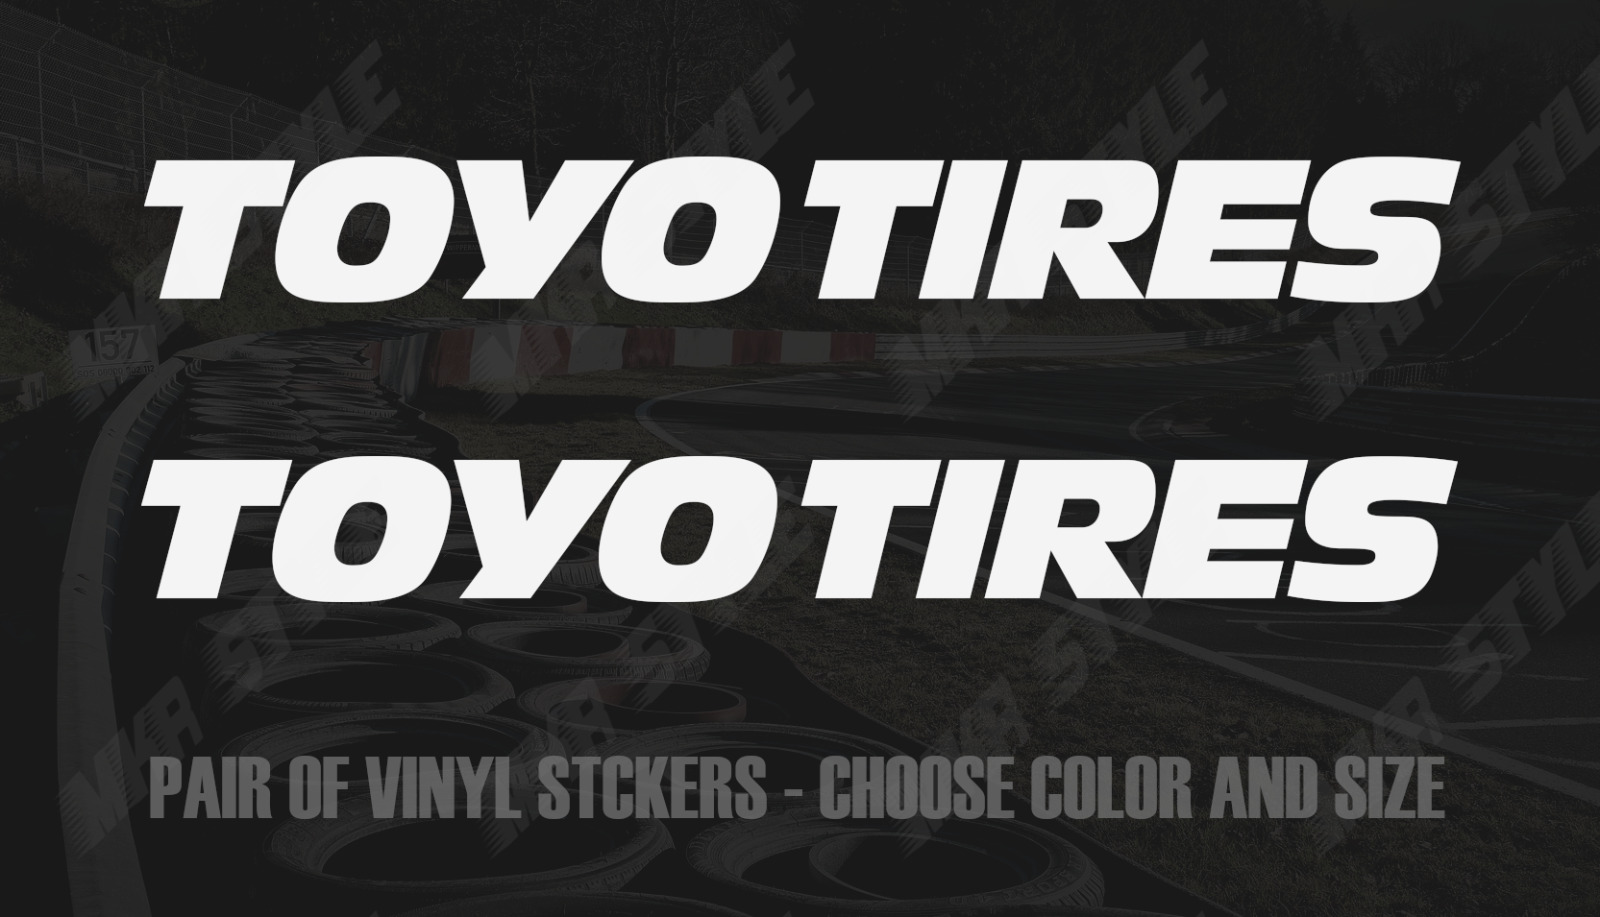 2x Toyo Tires Vinyl Stickers - Multiple Sizes & Colors - Pair of Window Decals